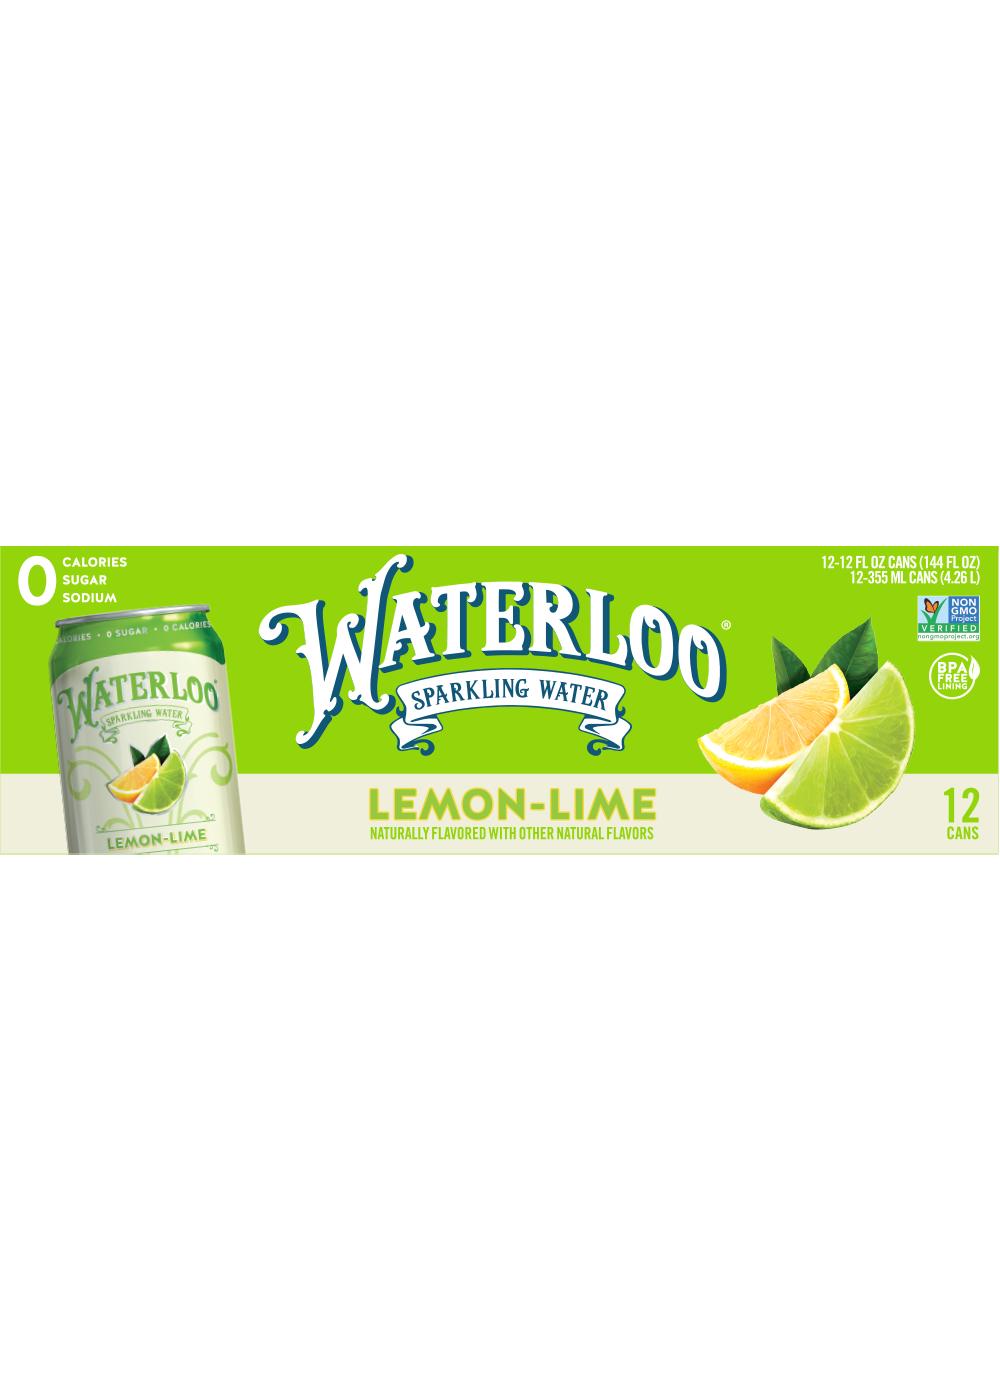 Waterloo Lemon-Lime Sparkling Water 12 pk Cans; image 1 of 2